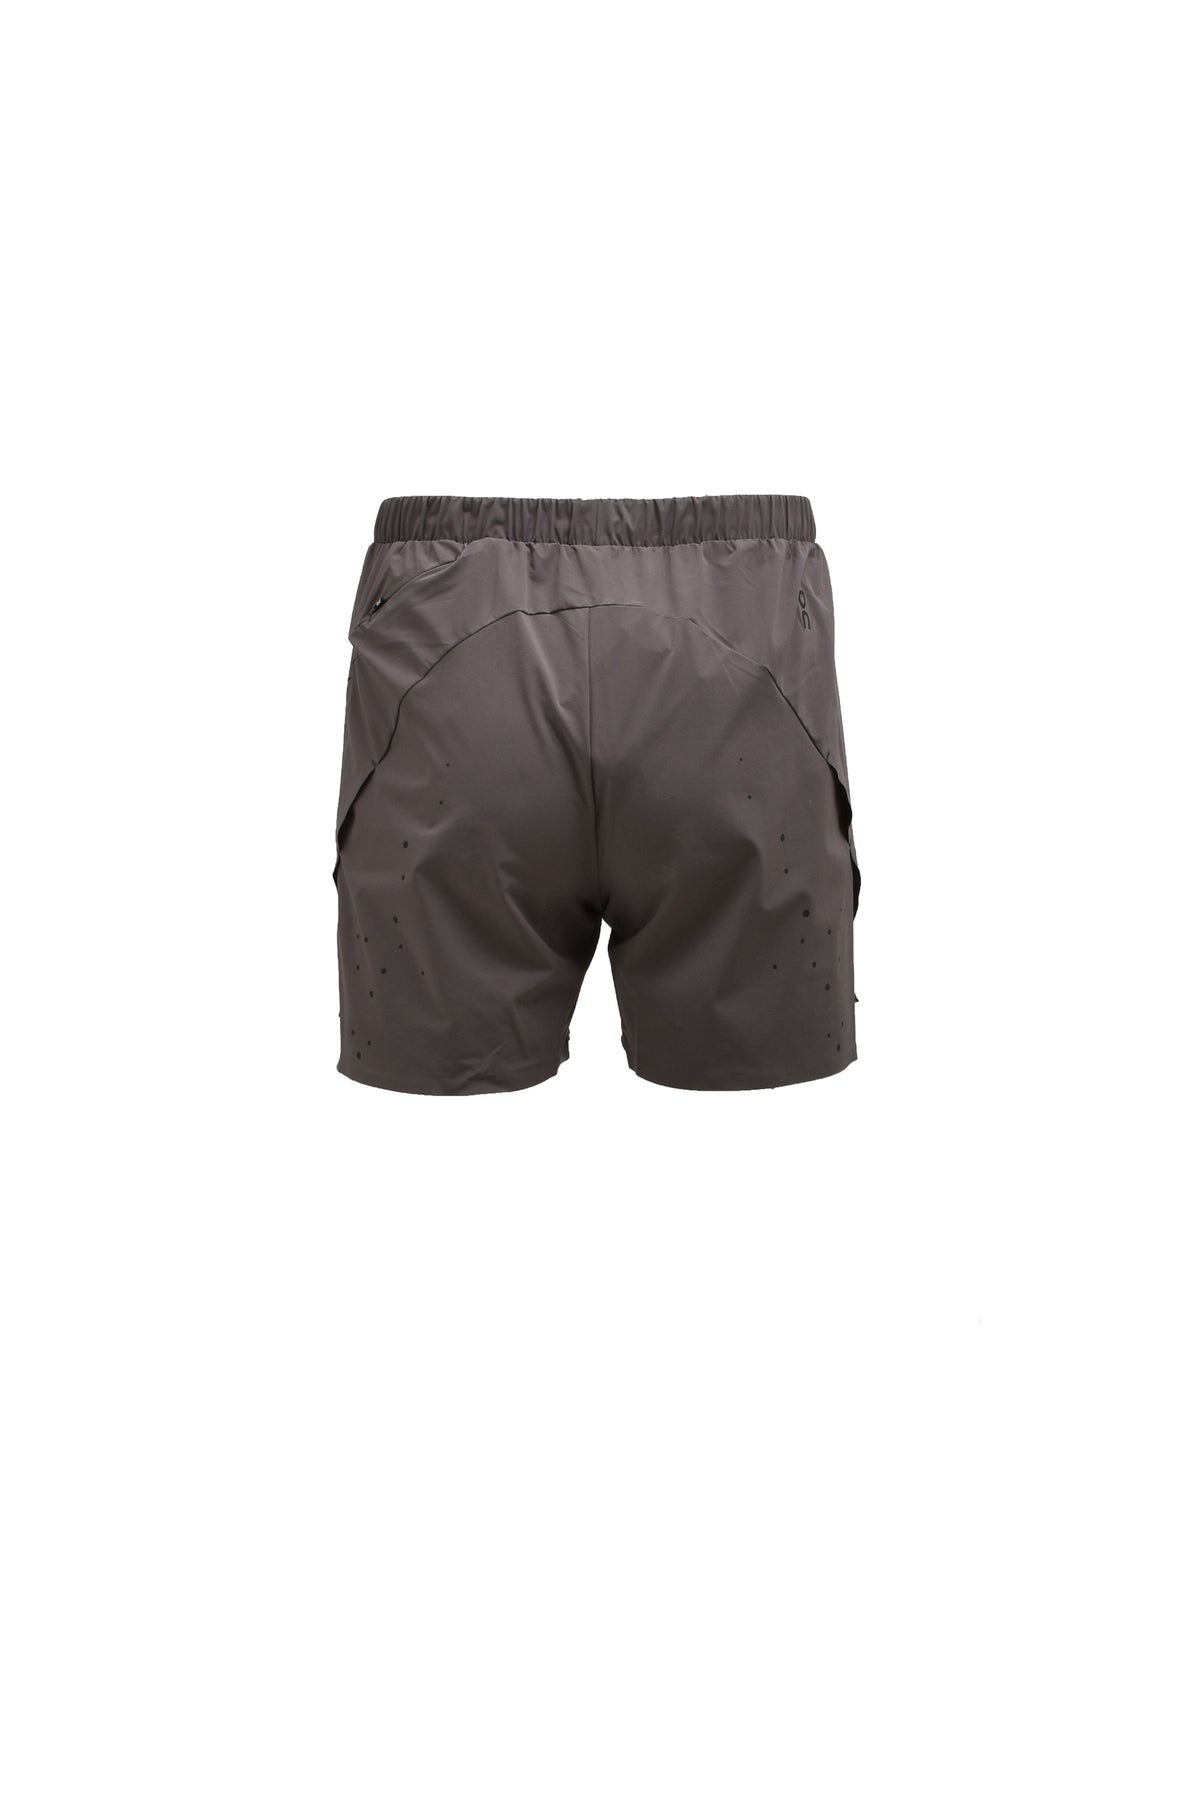 SHORTS (PAF) 1 / ECLIPSE | SHADOW